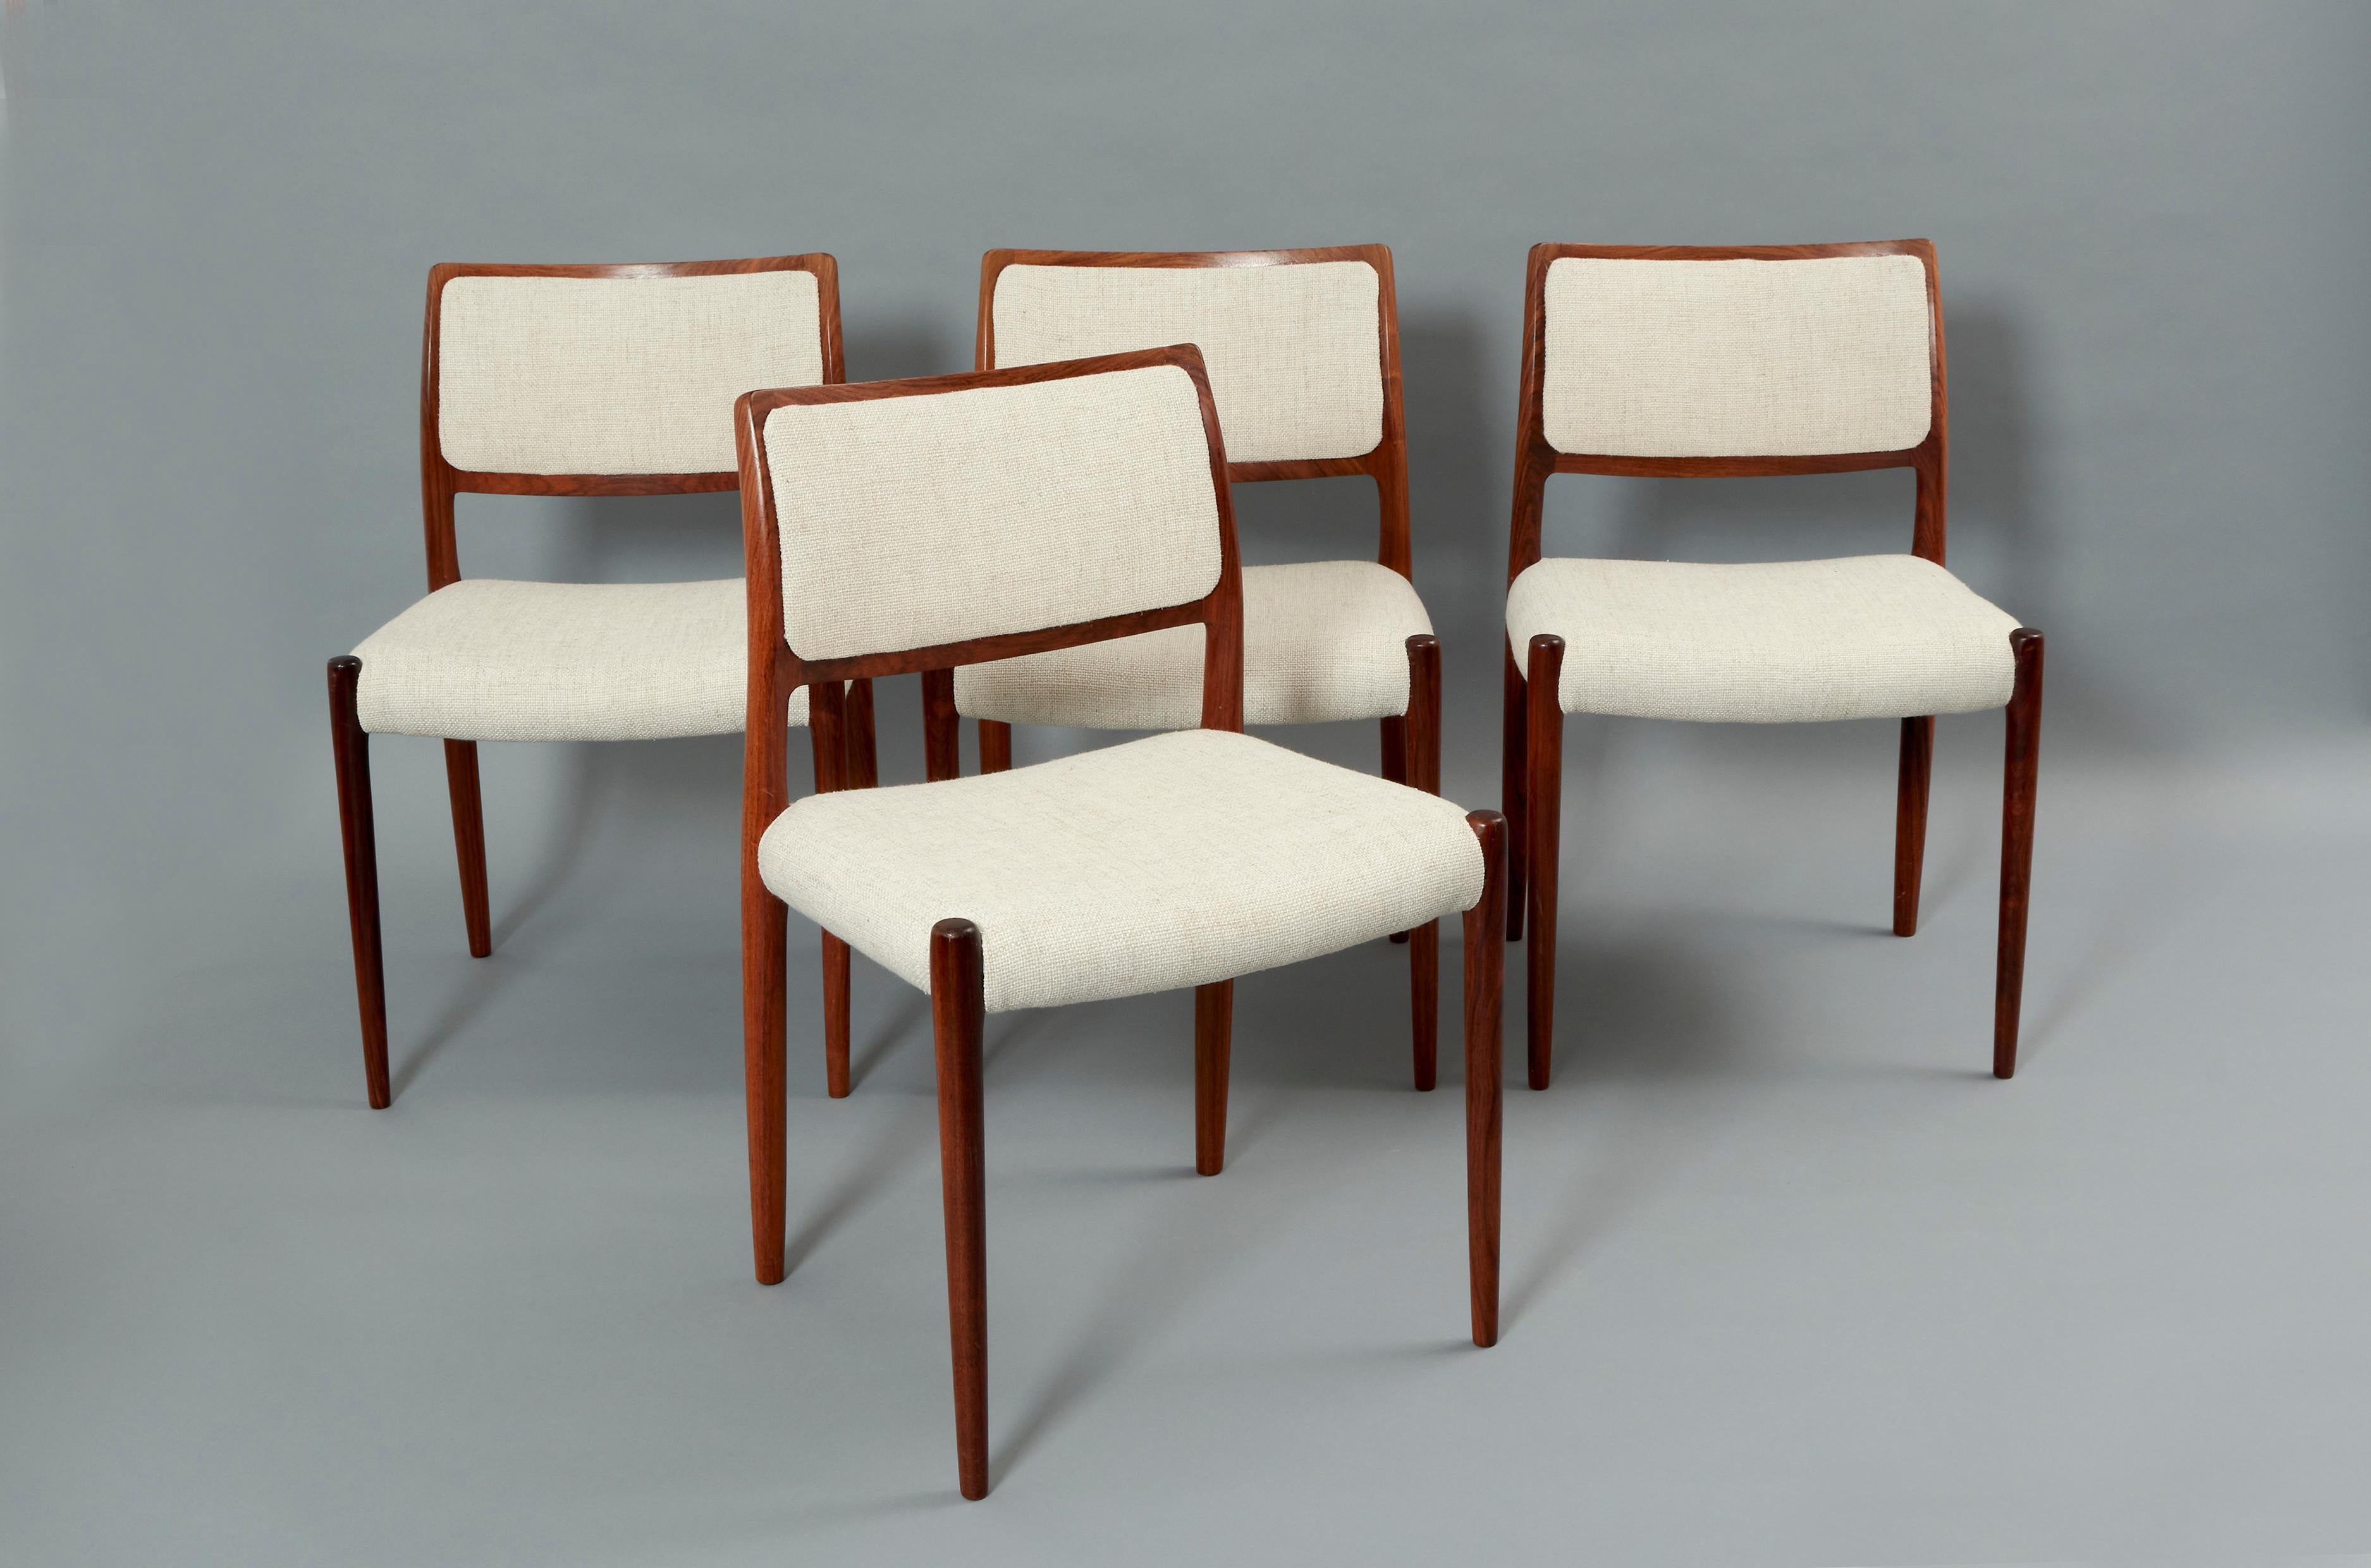 Six Dining room chairs designed by Niels Otto moller for JL Möllers Möbelfabrik. Upholstery and Rosewood. Denmark, 1960s 

Niels O. Moller founded the company J.L. Mollers Mobelfabrik, which produces up to today. He was famous for his chairs, each